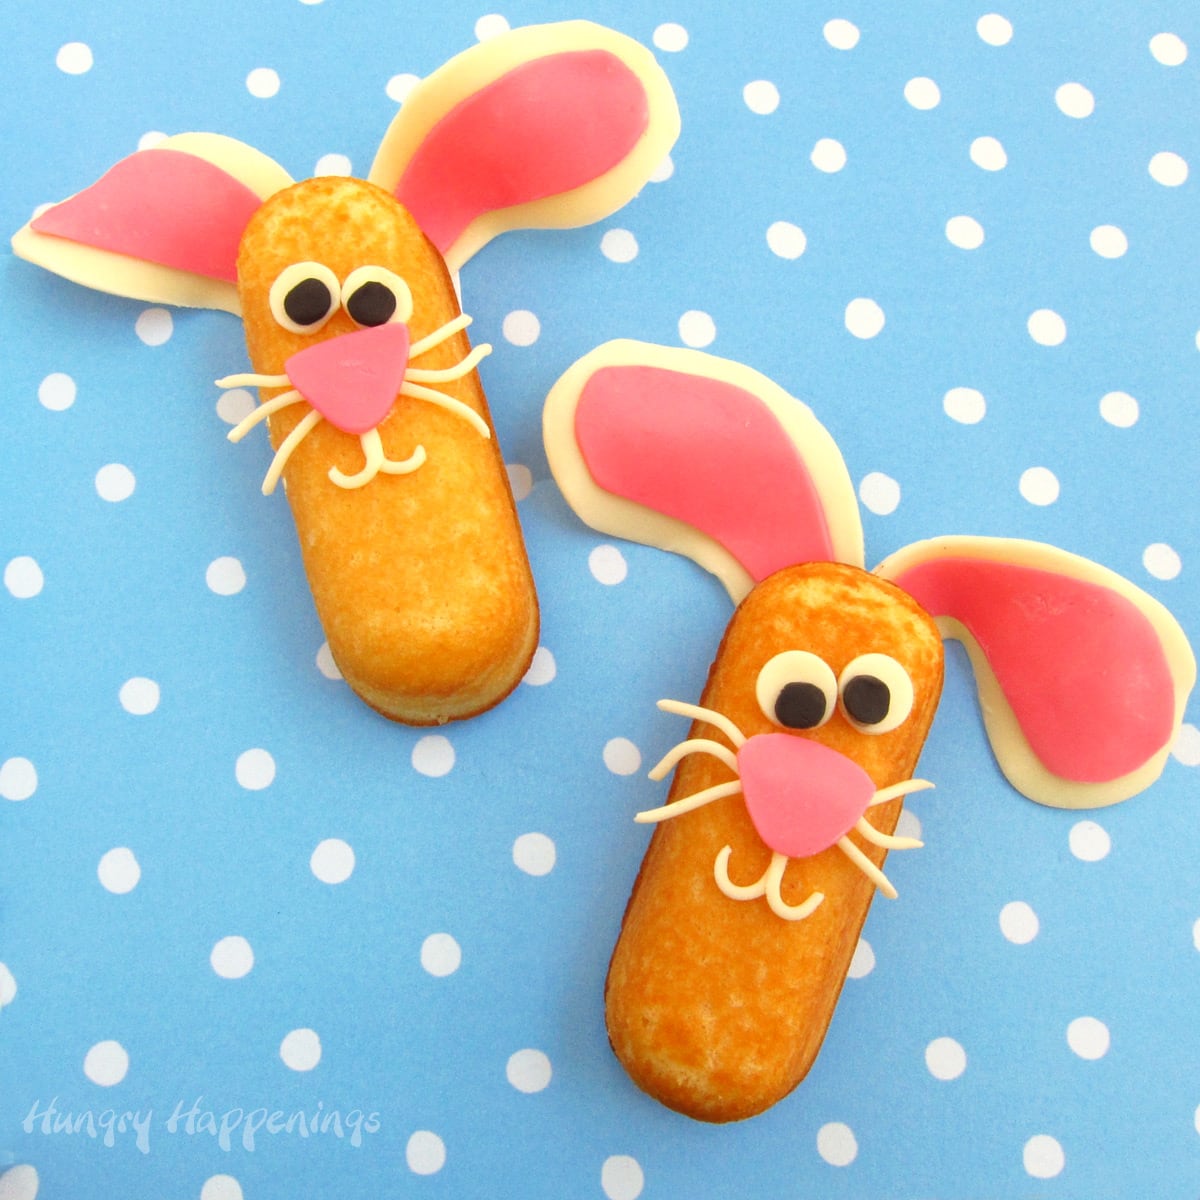 Twinkie Snack Cake Bunnies cute bunny cakes decorated with big floppy ears, cute eyes, and a pink nose.